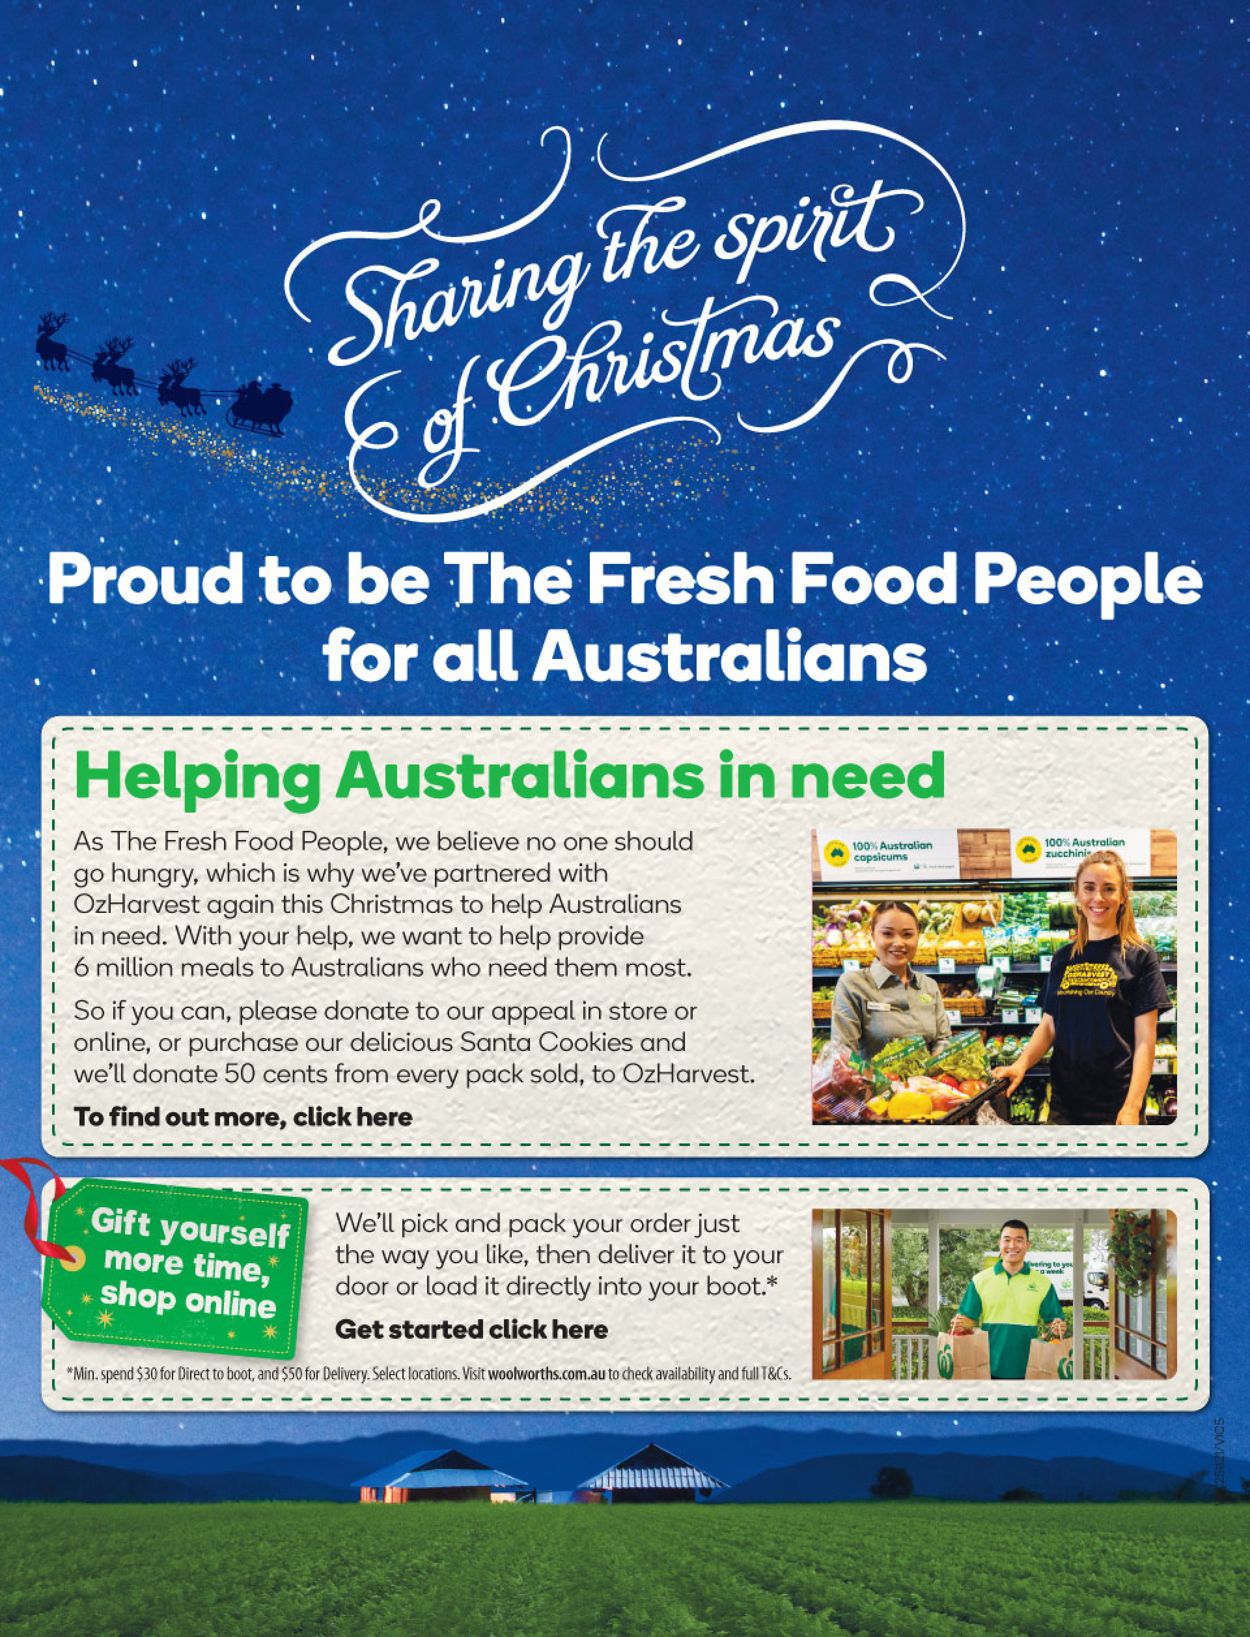 Woolworths - Black Friday 2020 Catalogue - 25/11-01/12/2020 (Page 5)